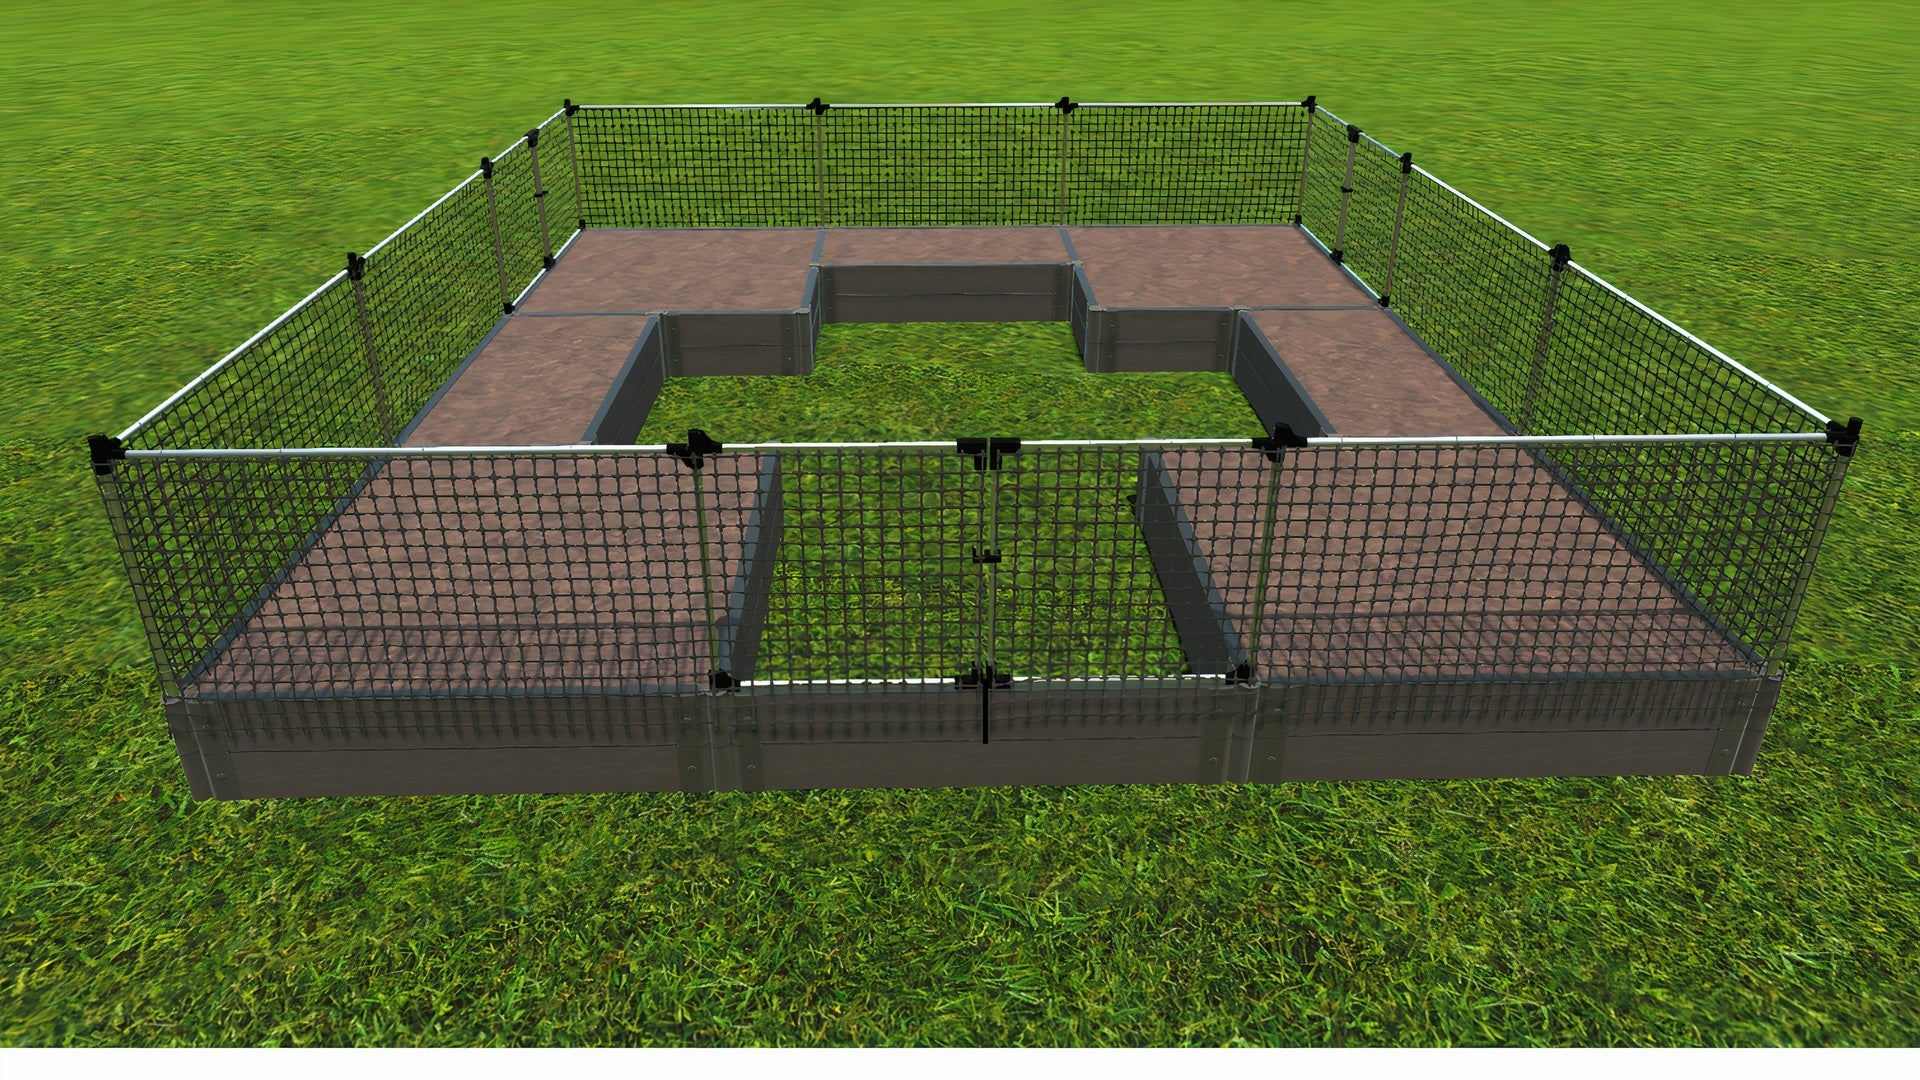 Walk-In 'Center Cross' 12' x 12' Animal Barrier Raised Garden Bed - 2" Profile Raised Garden Beds Frame It All Weathered Wood 2 Inch 2 Levels = 11 Inches 2 Foot